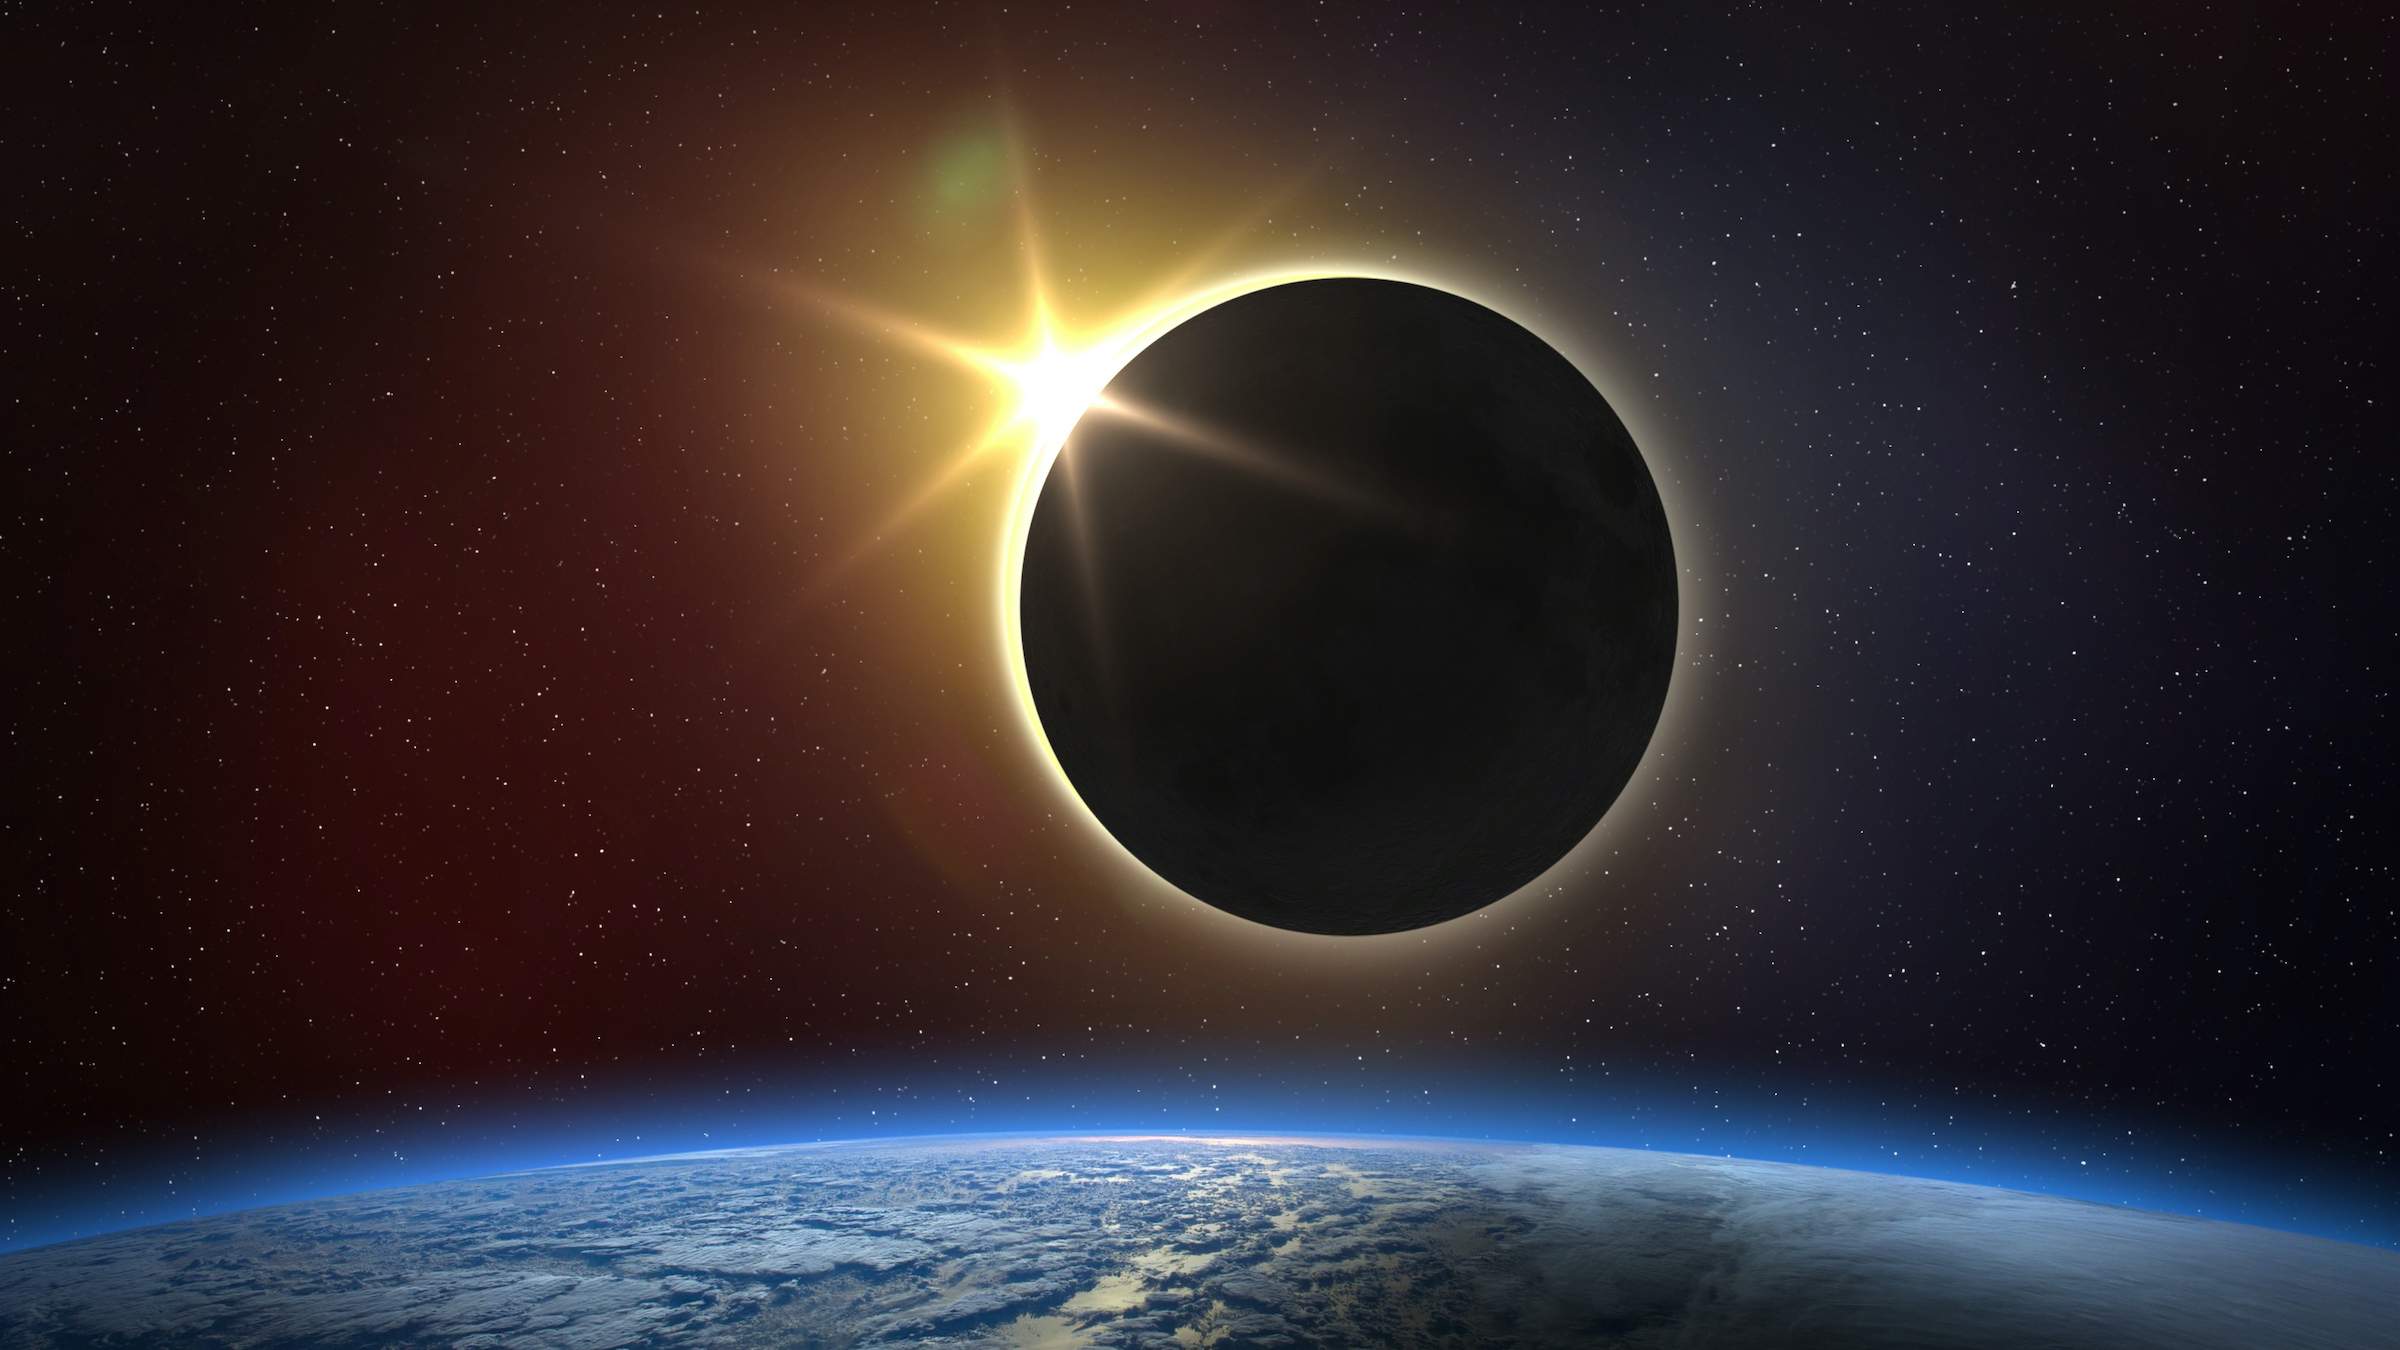 On April 8, 2024, the Moon will completely block the Sun for a few minutes in a total solar eclipse that will pass over North America.